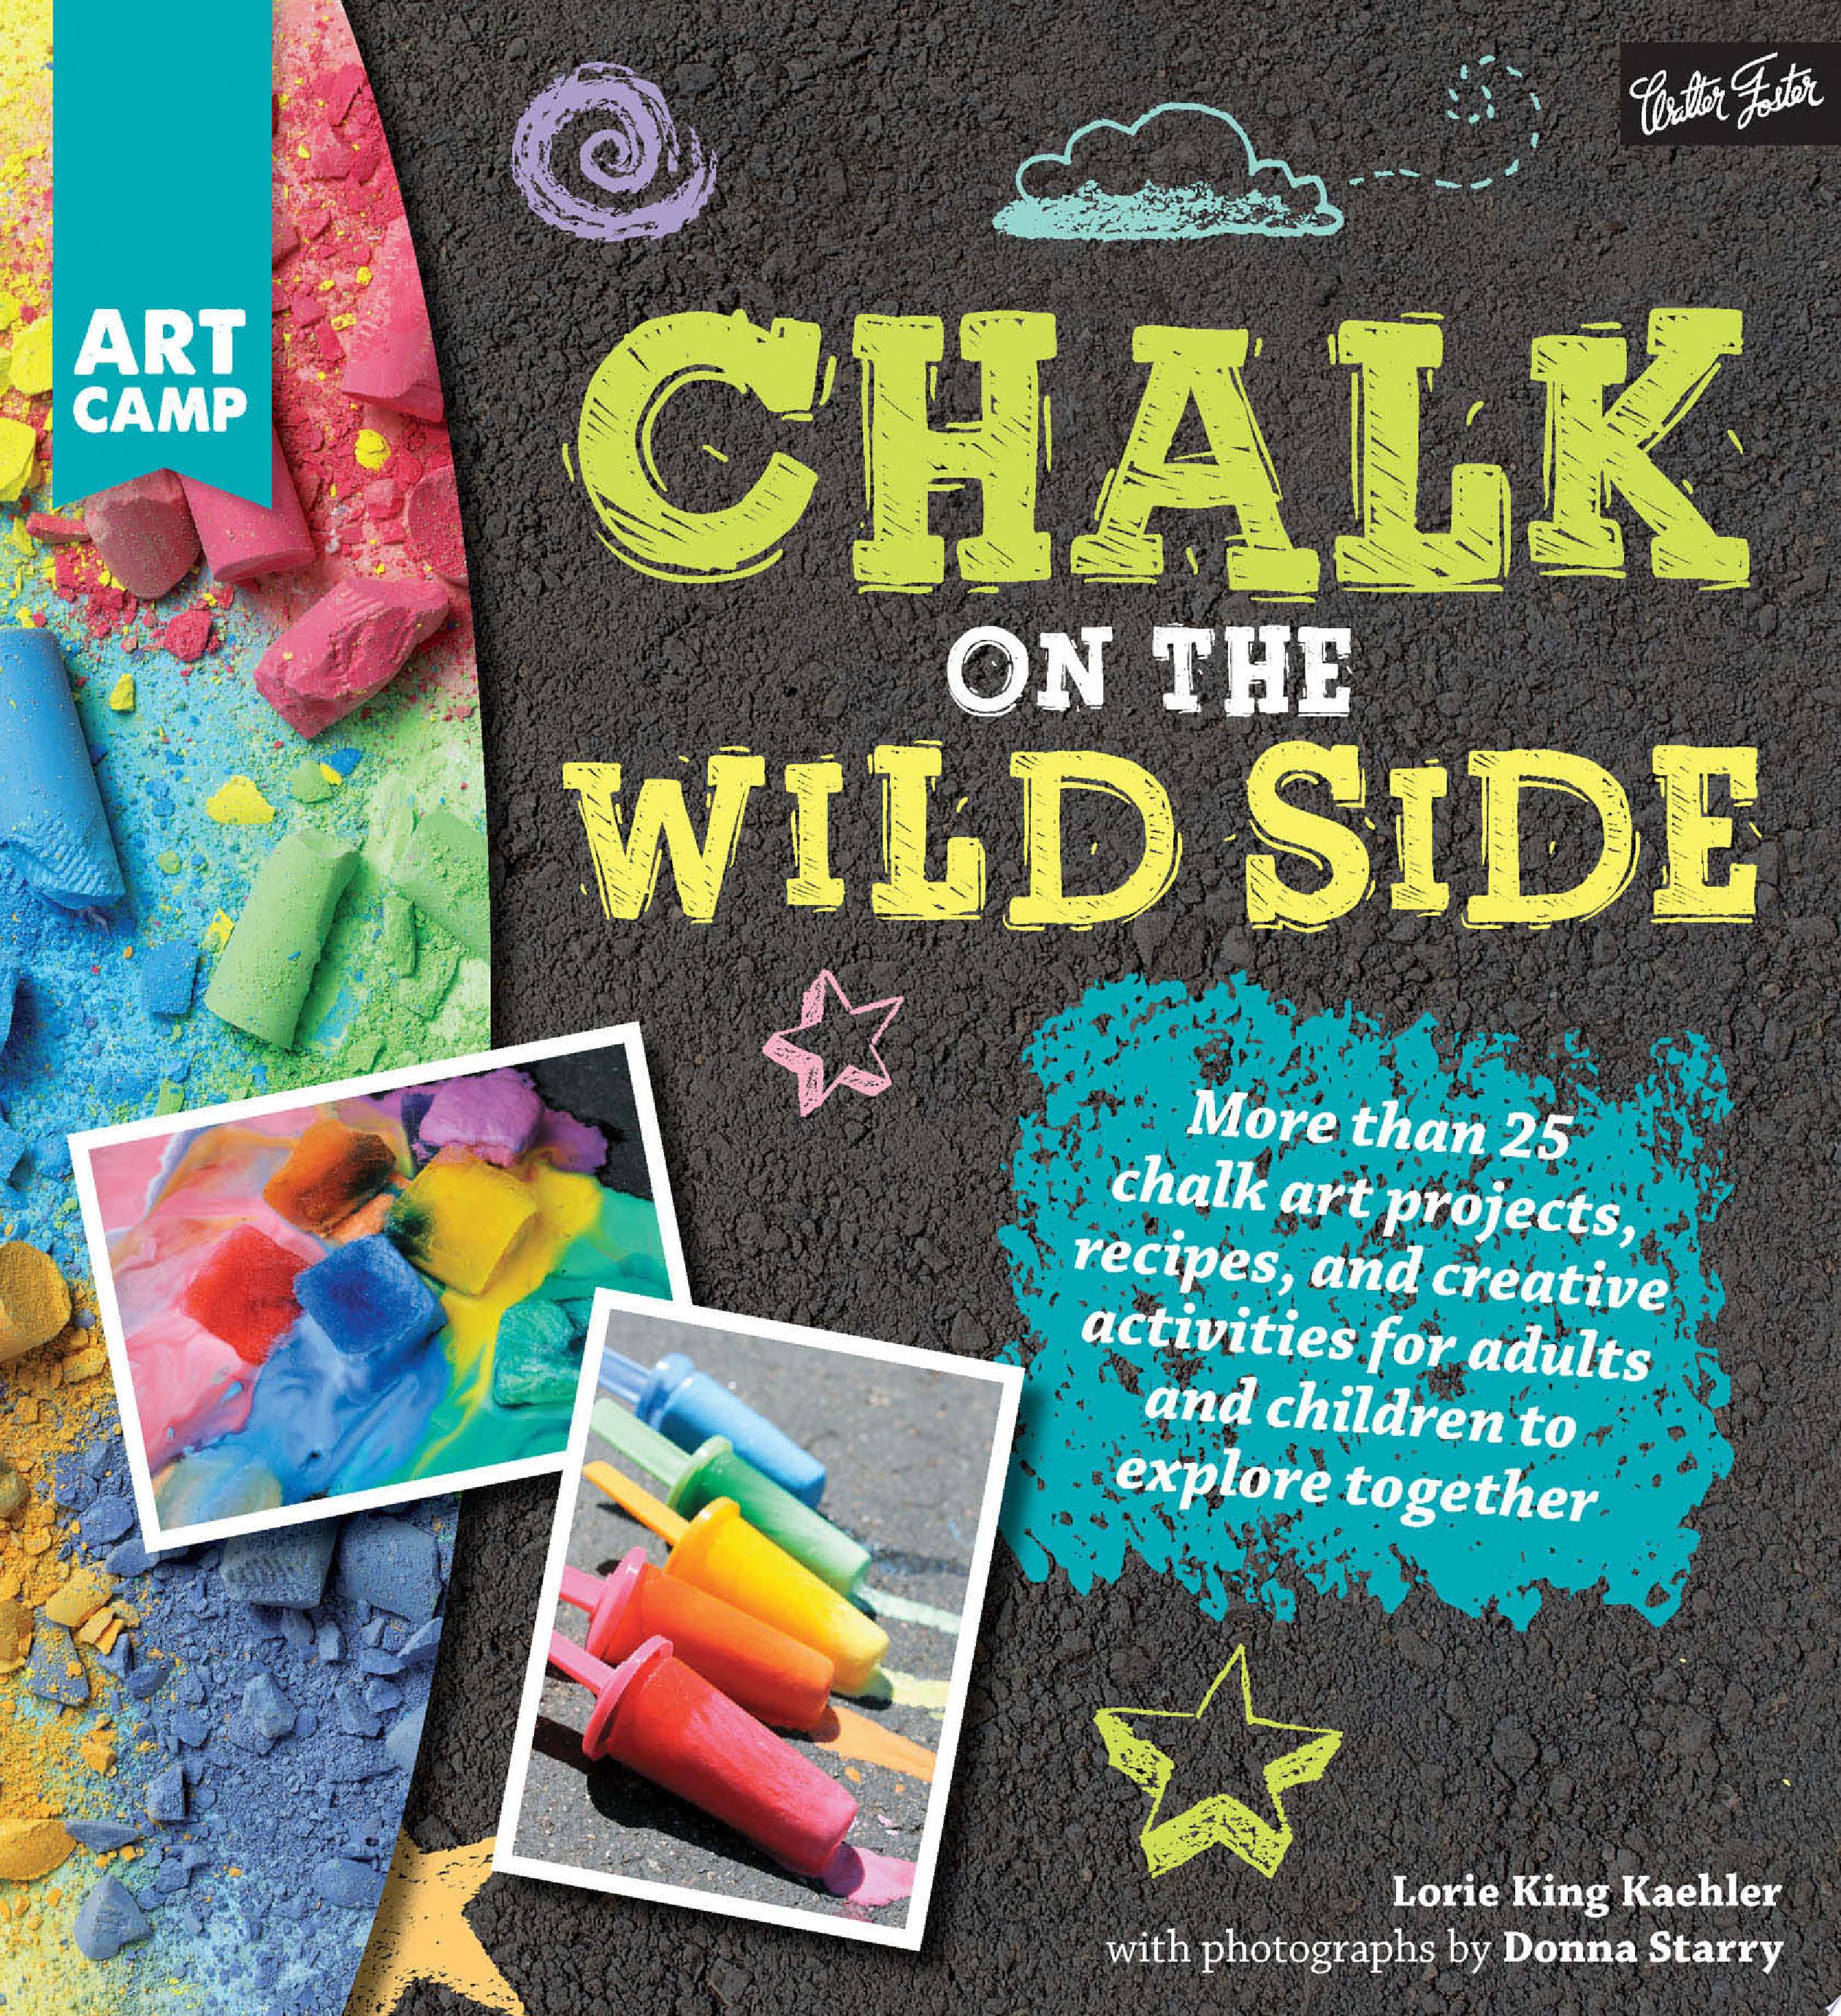 Image for "Chalk on the Wild Side"